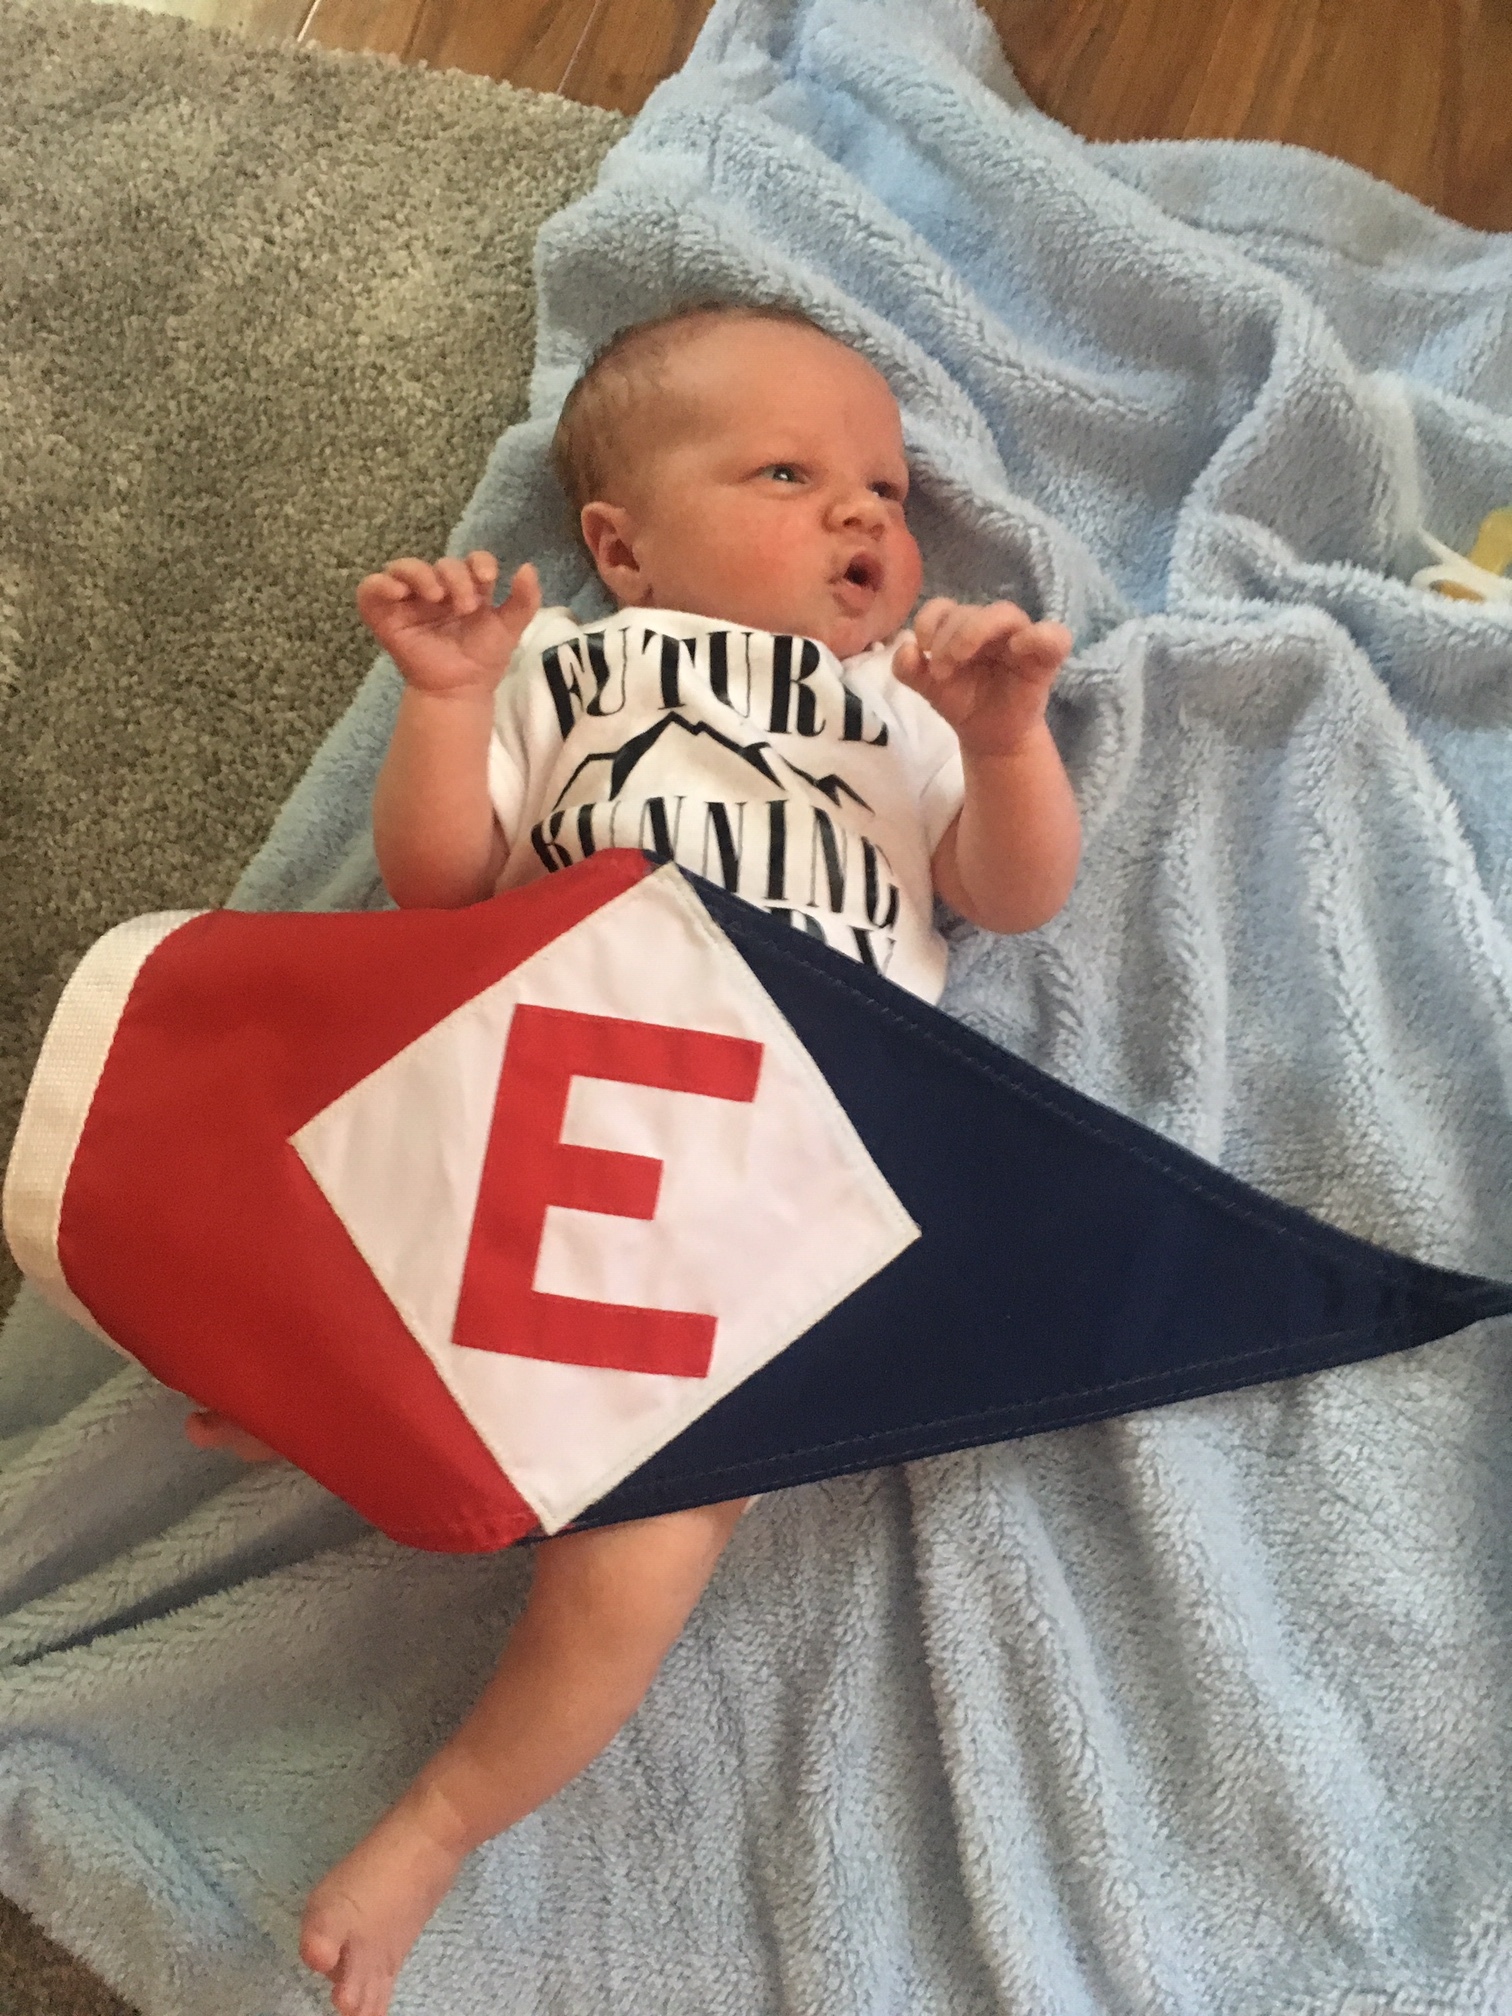  Owen Robert, the newest member of the EYC family, shows his EYC pride 